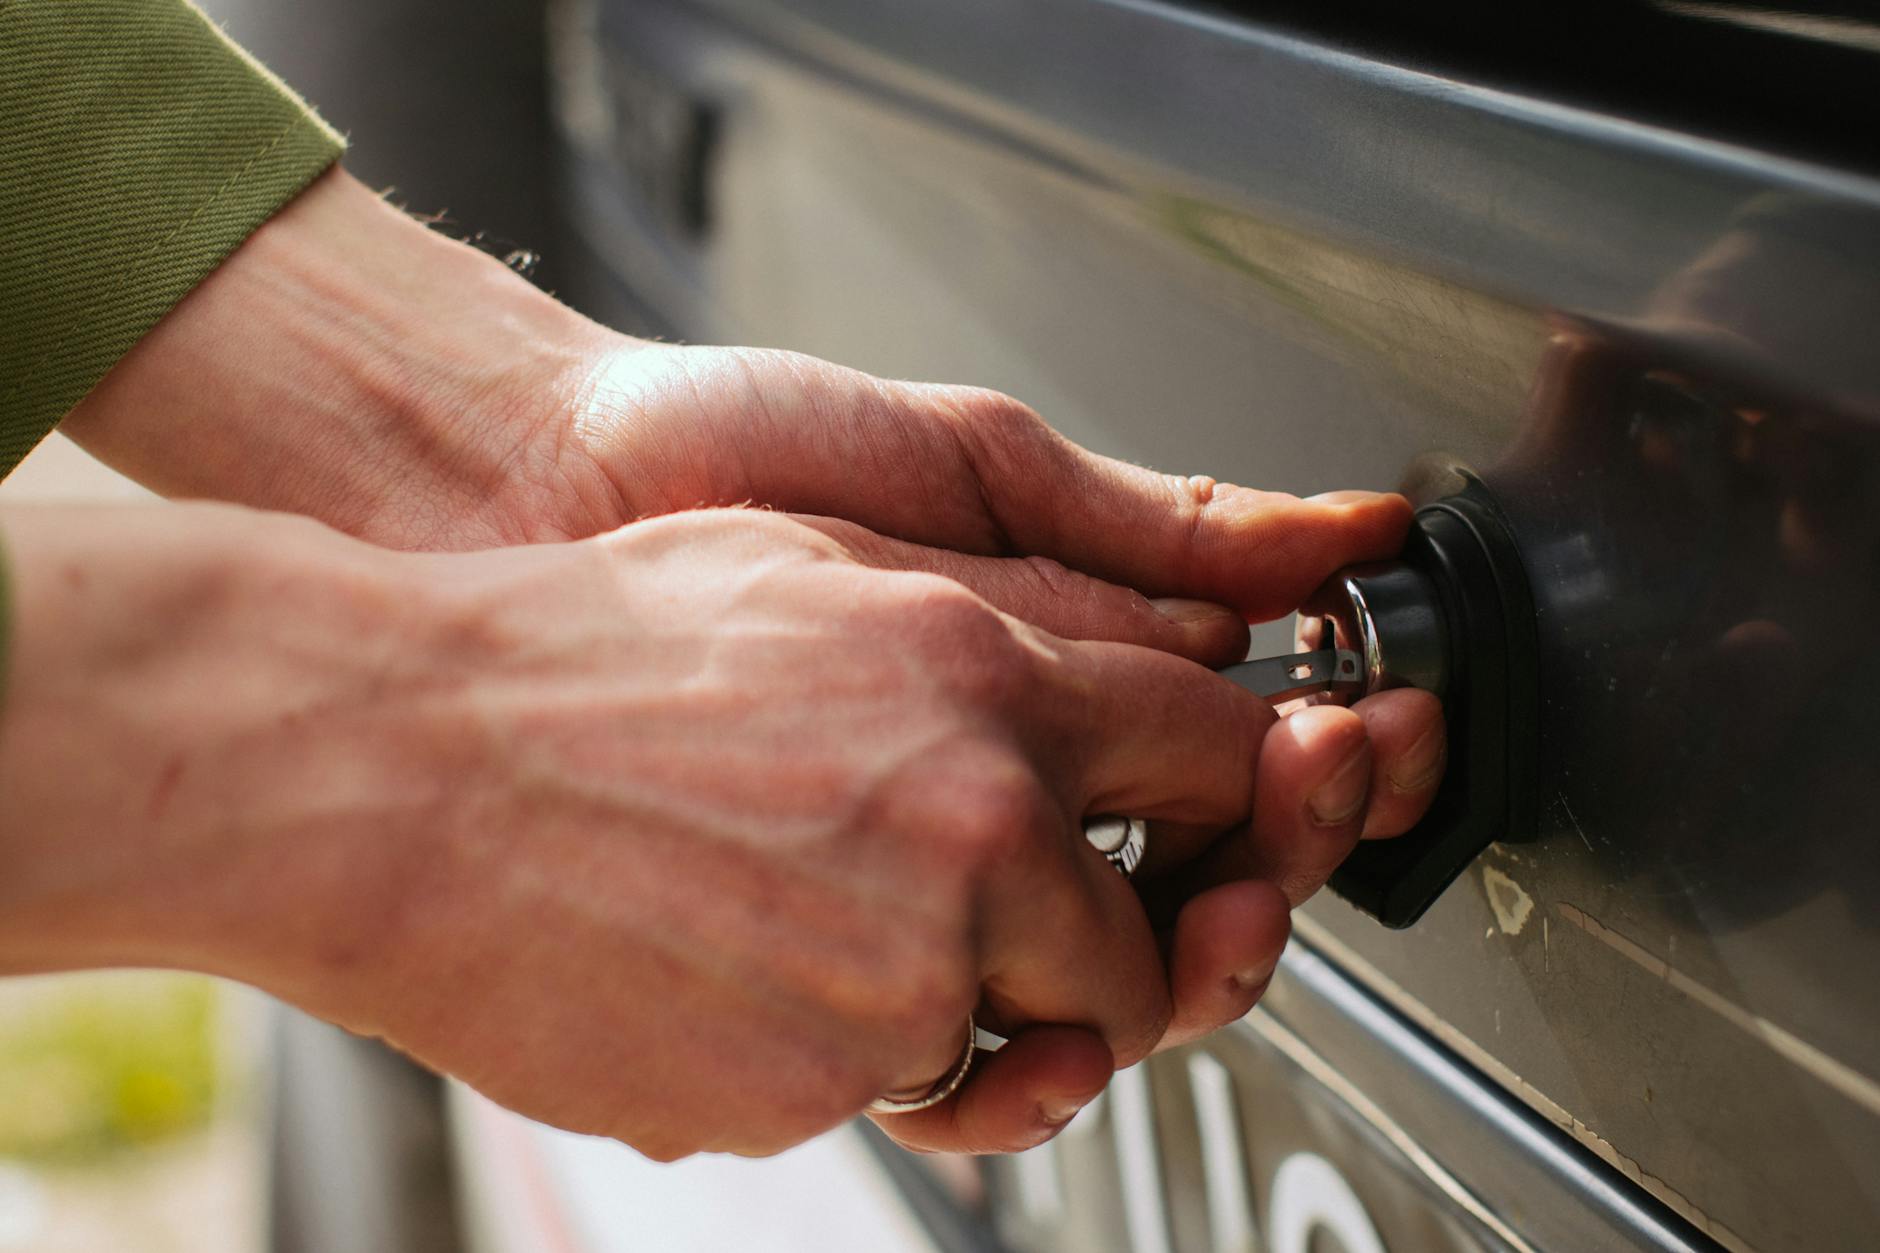 hands of a man unlocking car trunk with a key